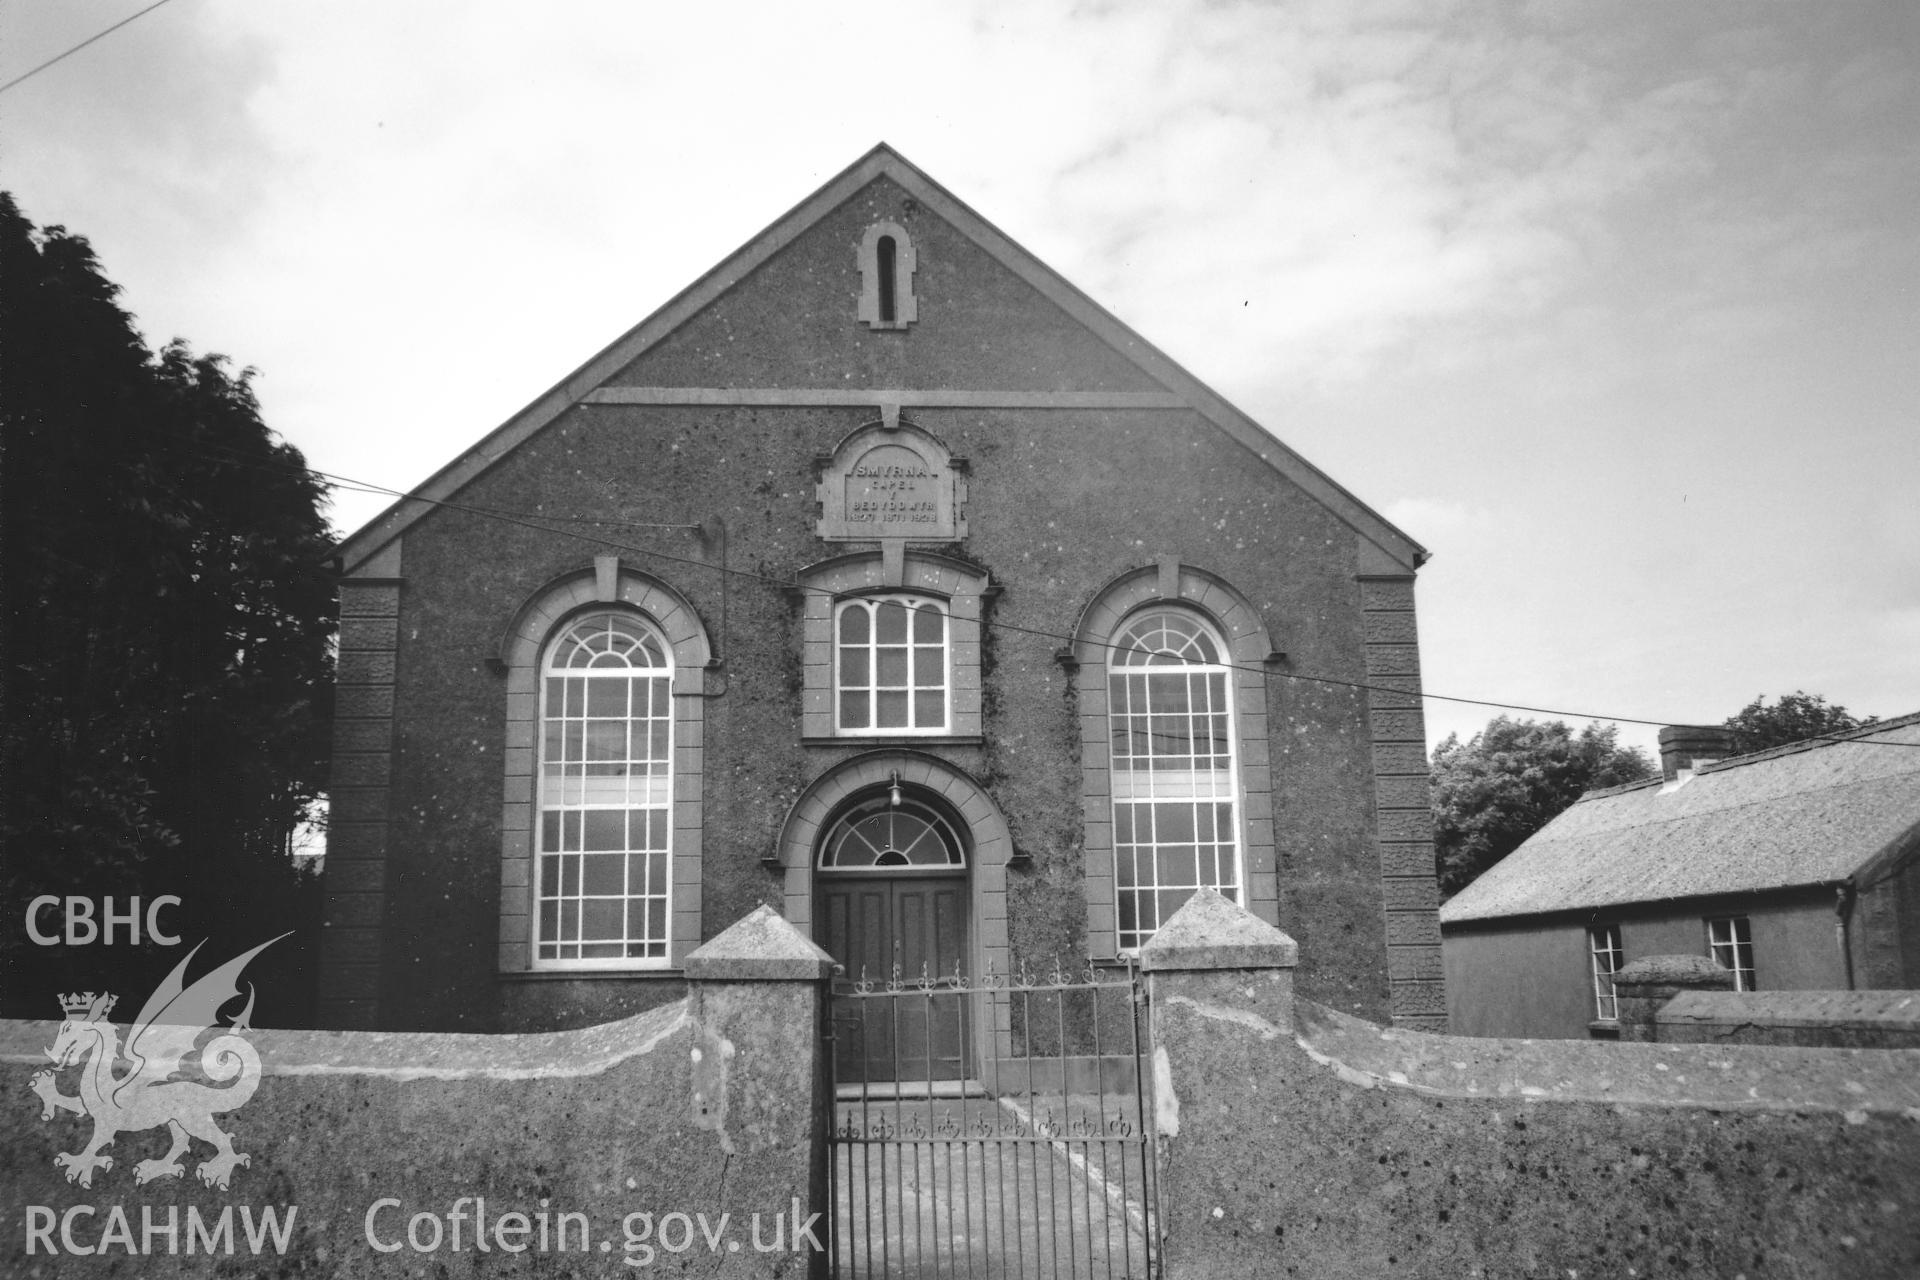 Digital copy of a black and white photograph showing a view of Smyrna Baptist Chapel, Puncheston, taken by Robert Scourfield, 1996.